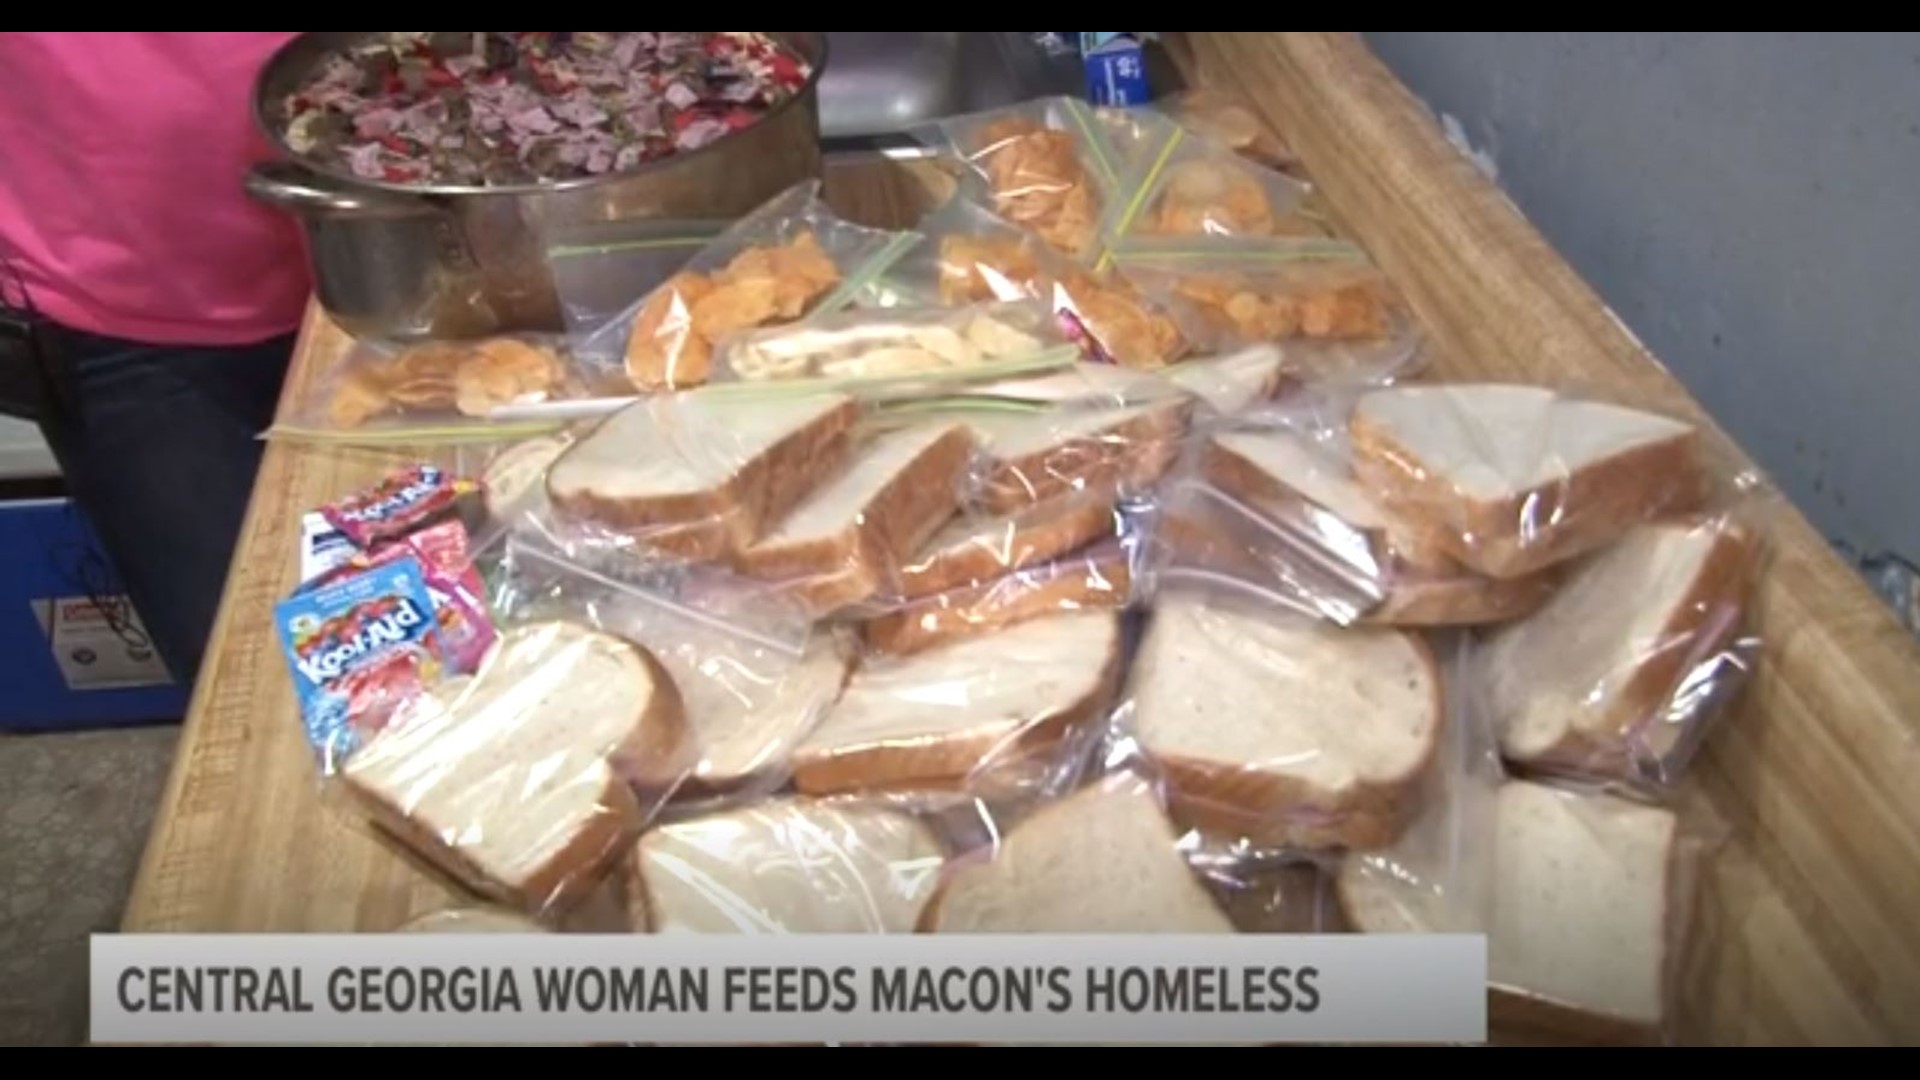 For the last two weeks, Lakeshia Cleveland-Burney has made sandwiches, drinks, and snacks for homeless people in Central City Park.